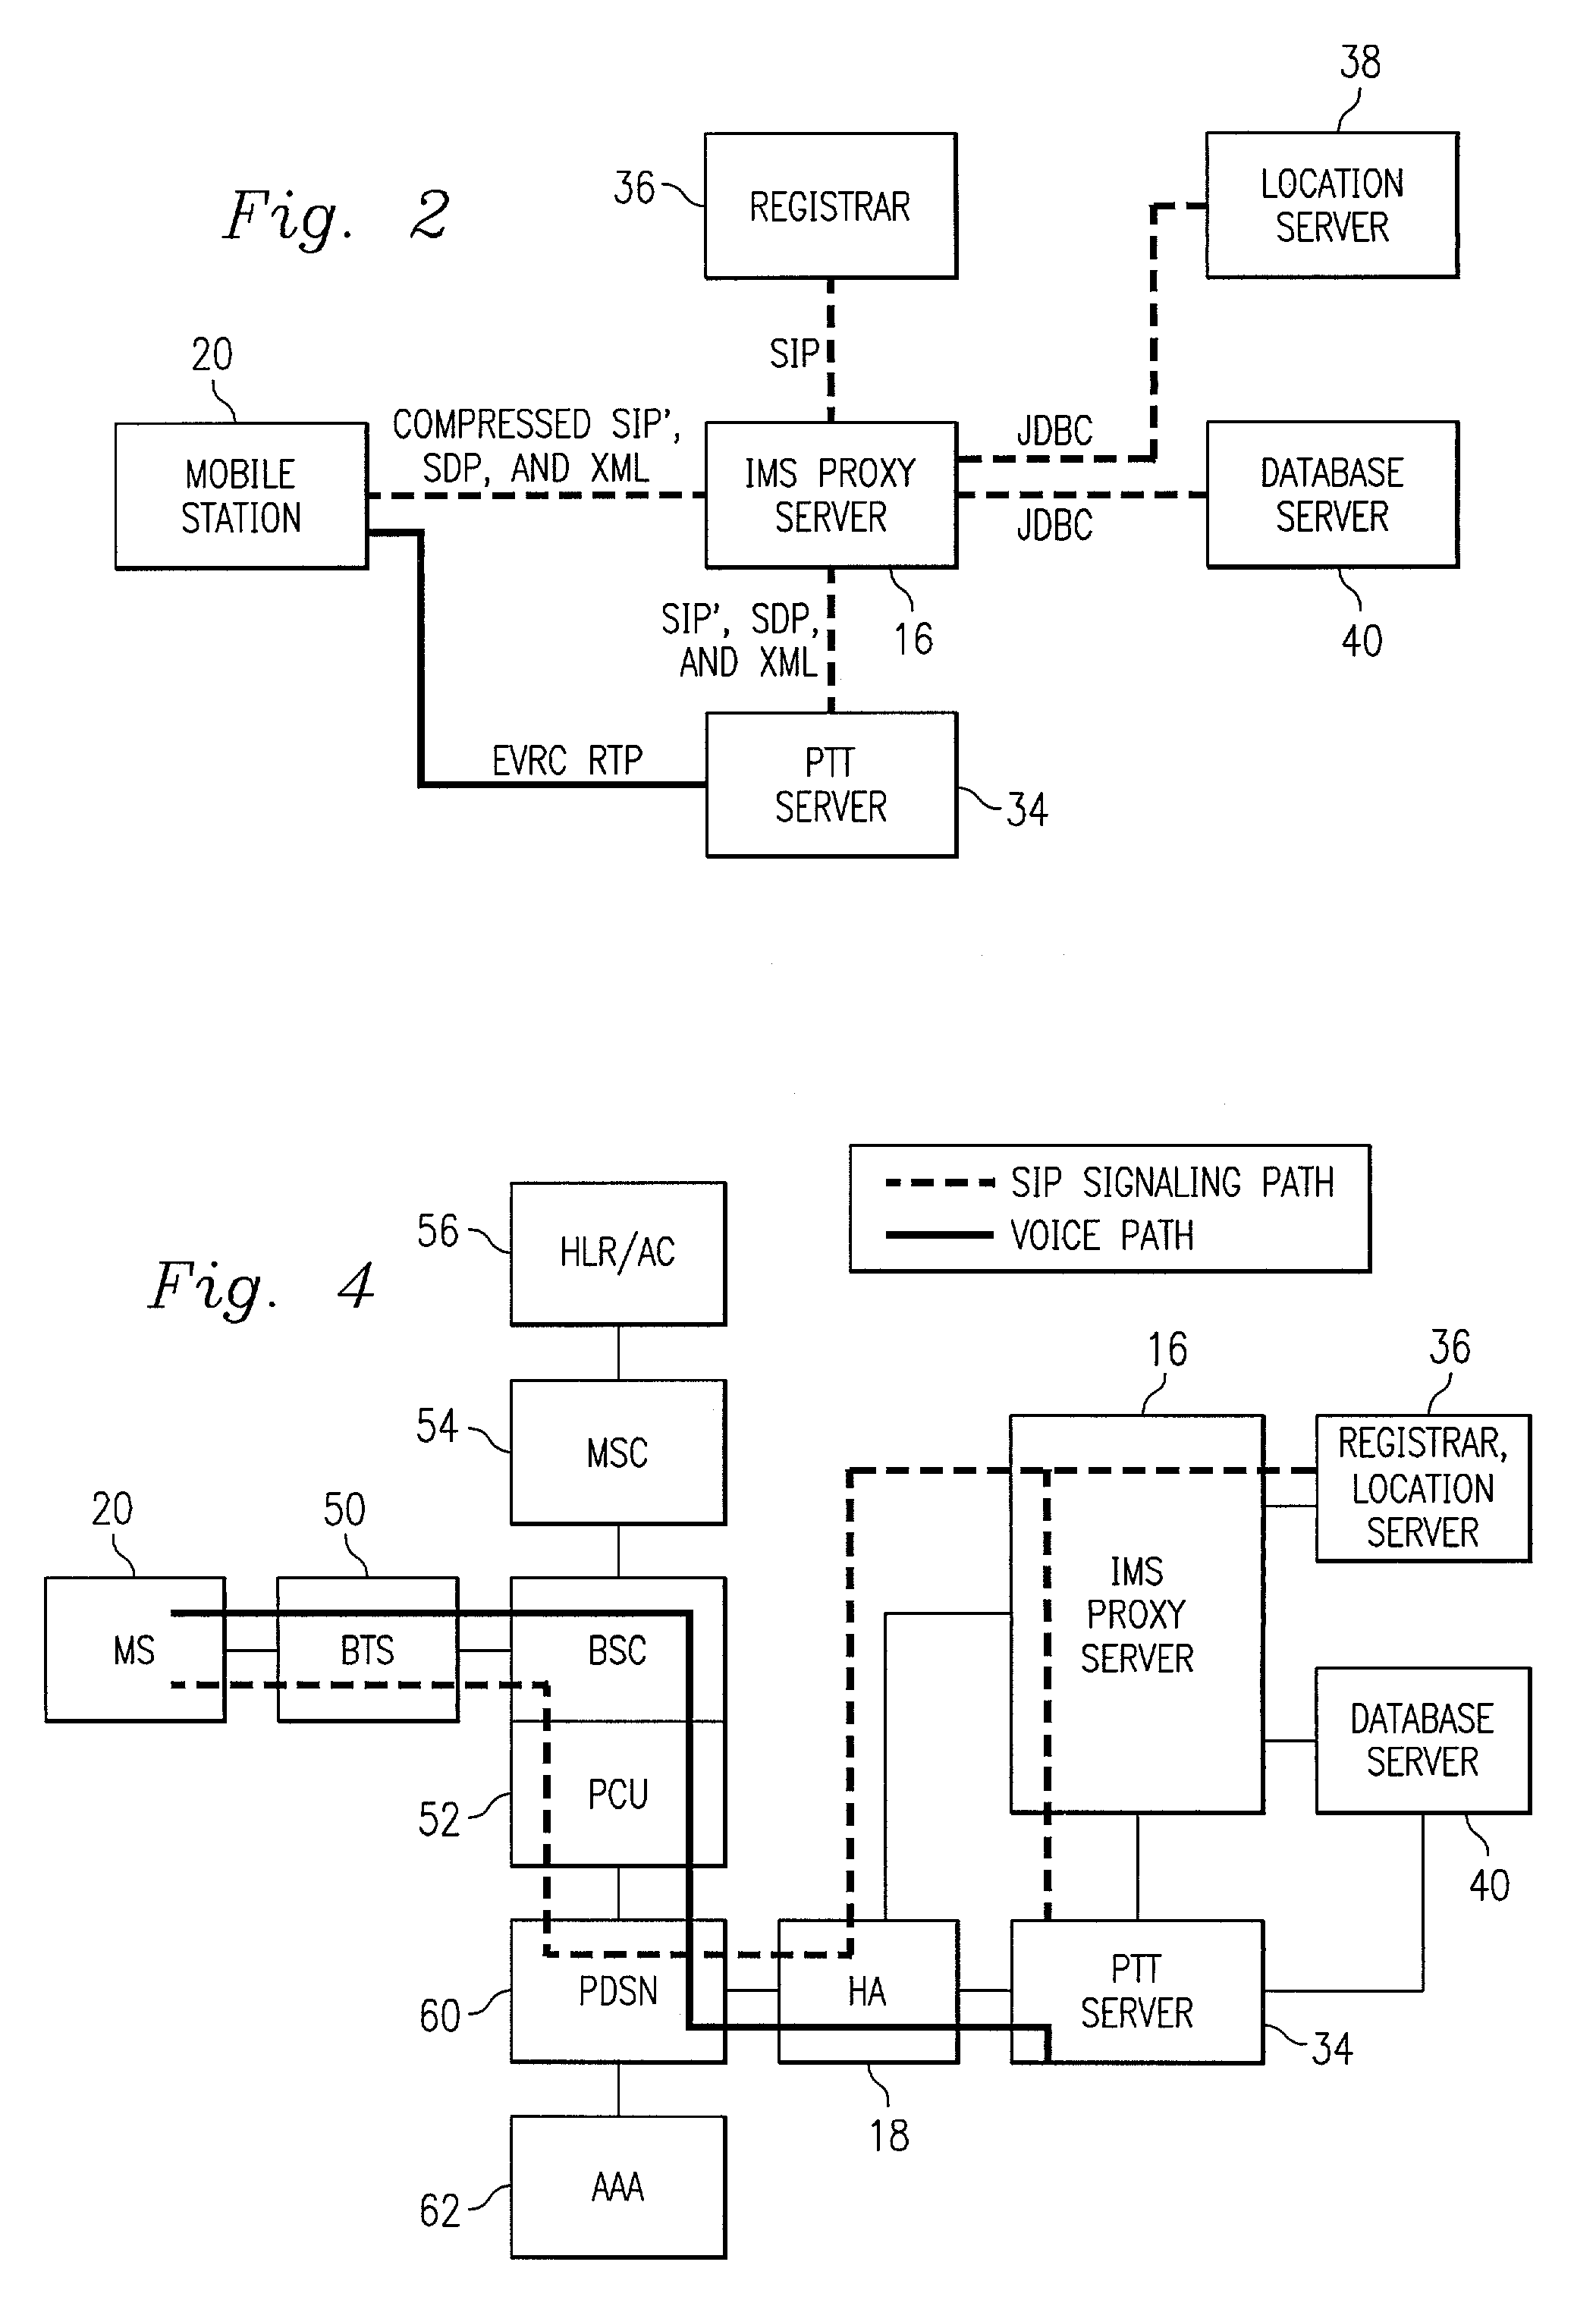 Push-to-talk wireless telecommunications system utilizing a voice-over-IP network